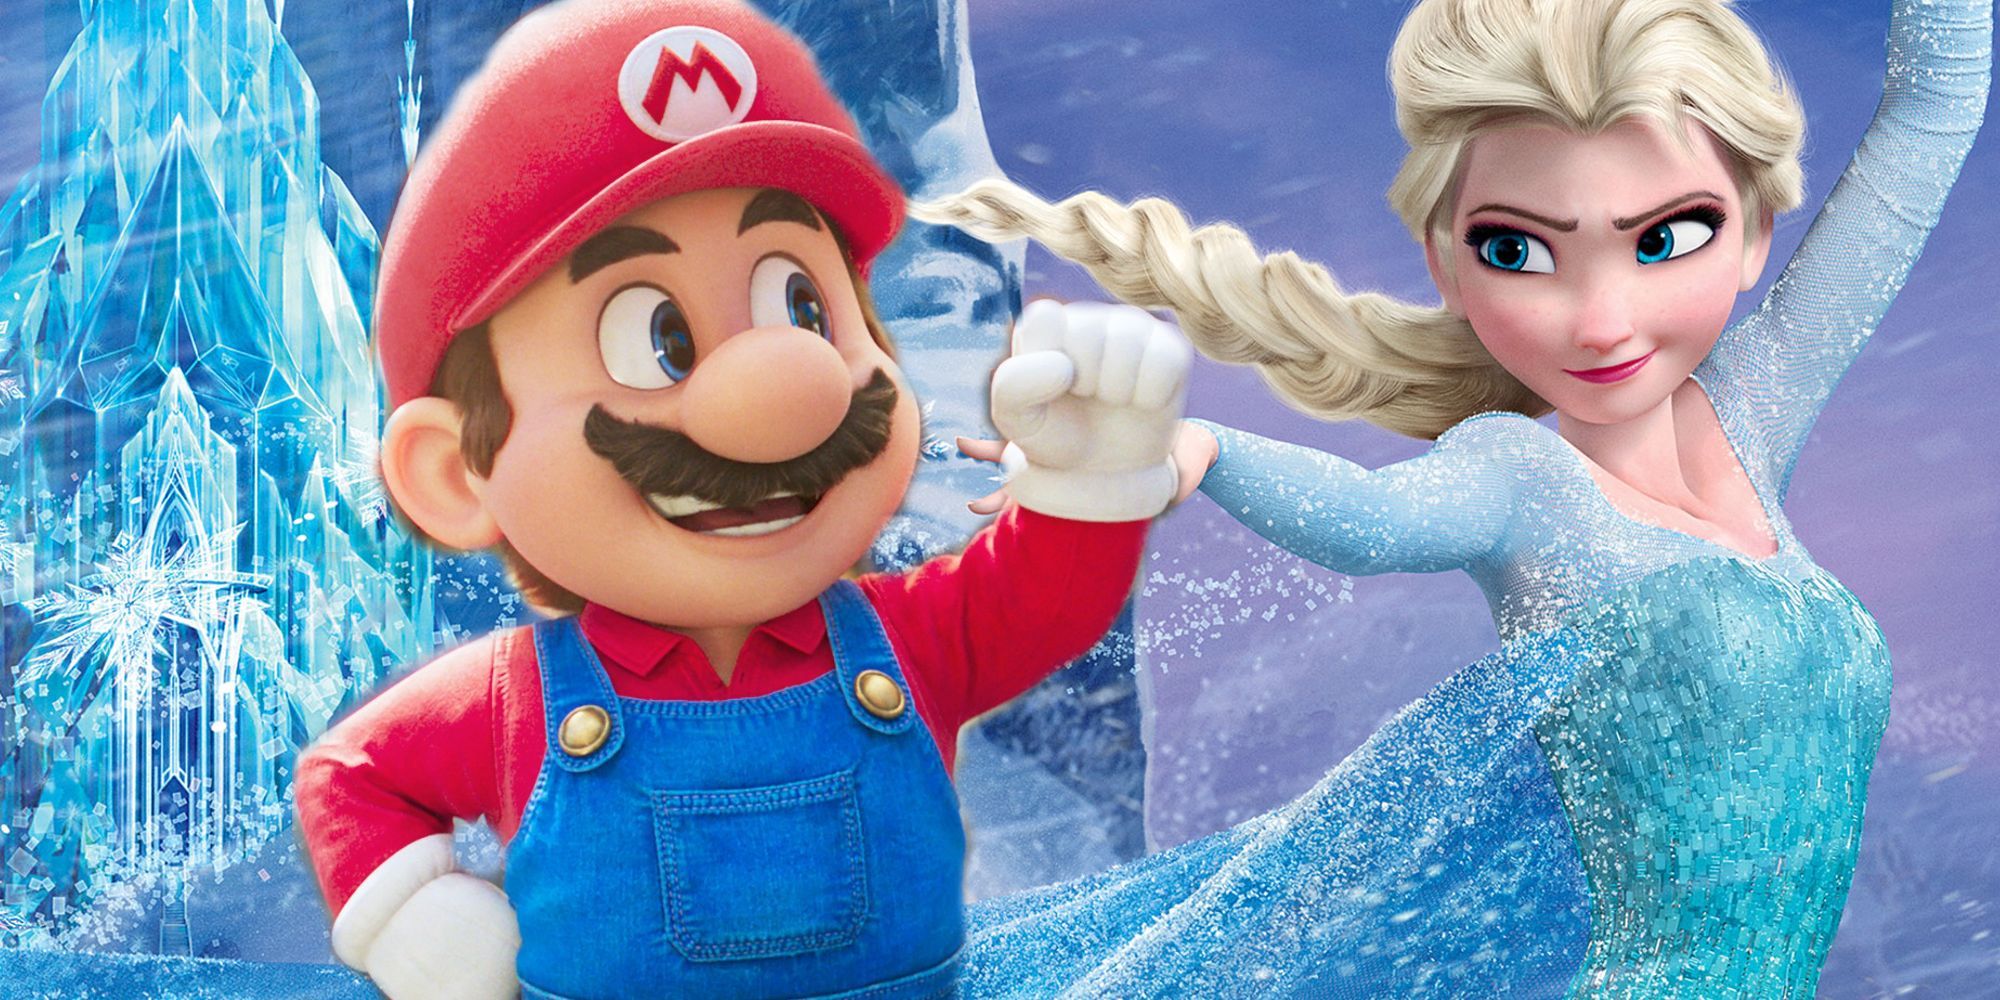 Blended image of Mario with his fist up and Elsa making her move from Frozen 